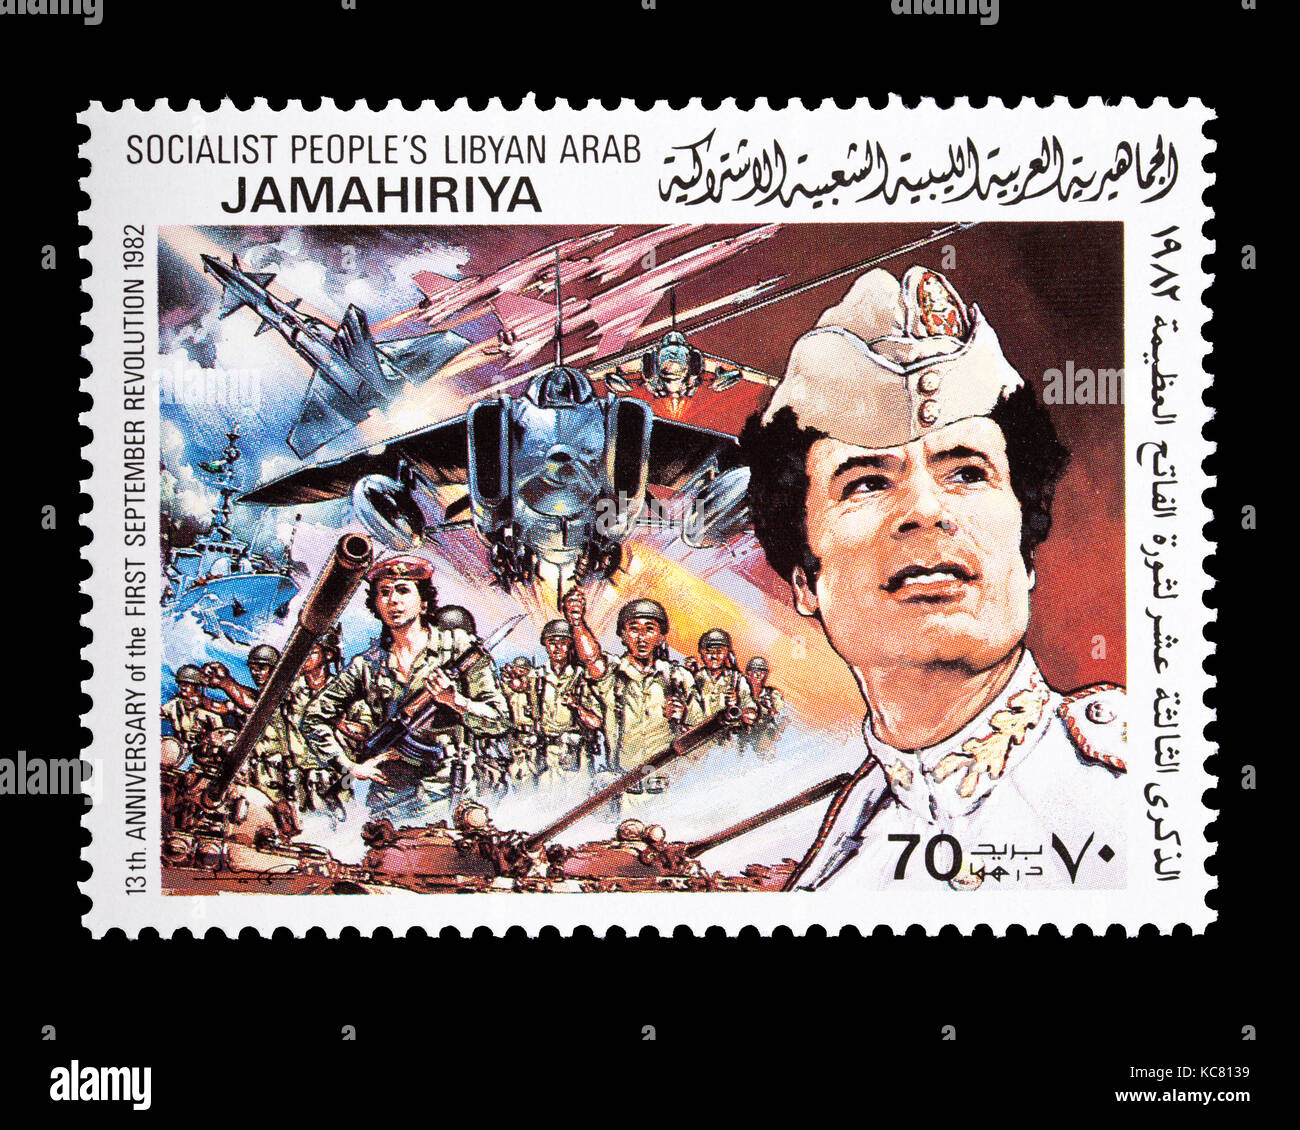 Postage stamp from Libya depicting Muammar Gaddafi in a military uniform and military exercises, 13'th anniversary of the September 1 revolution. Stock Photo